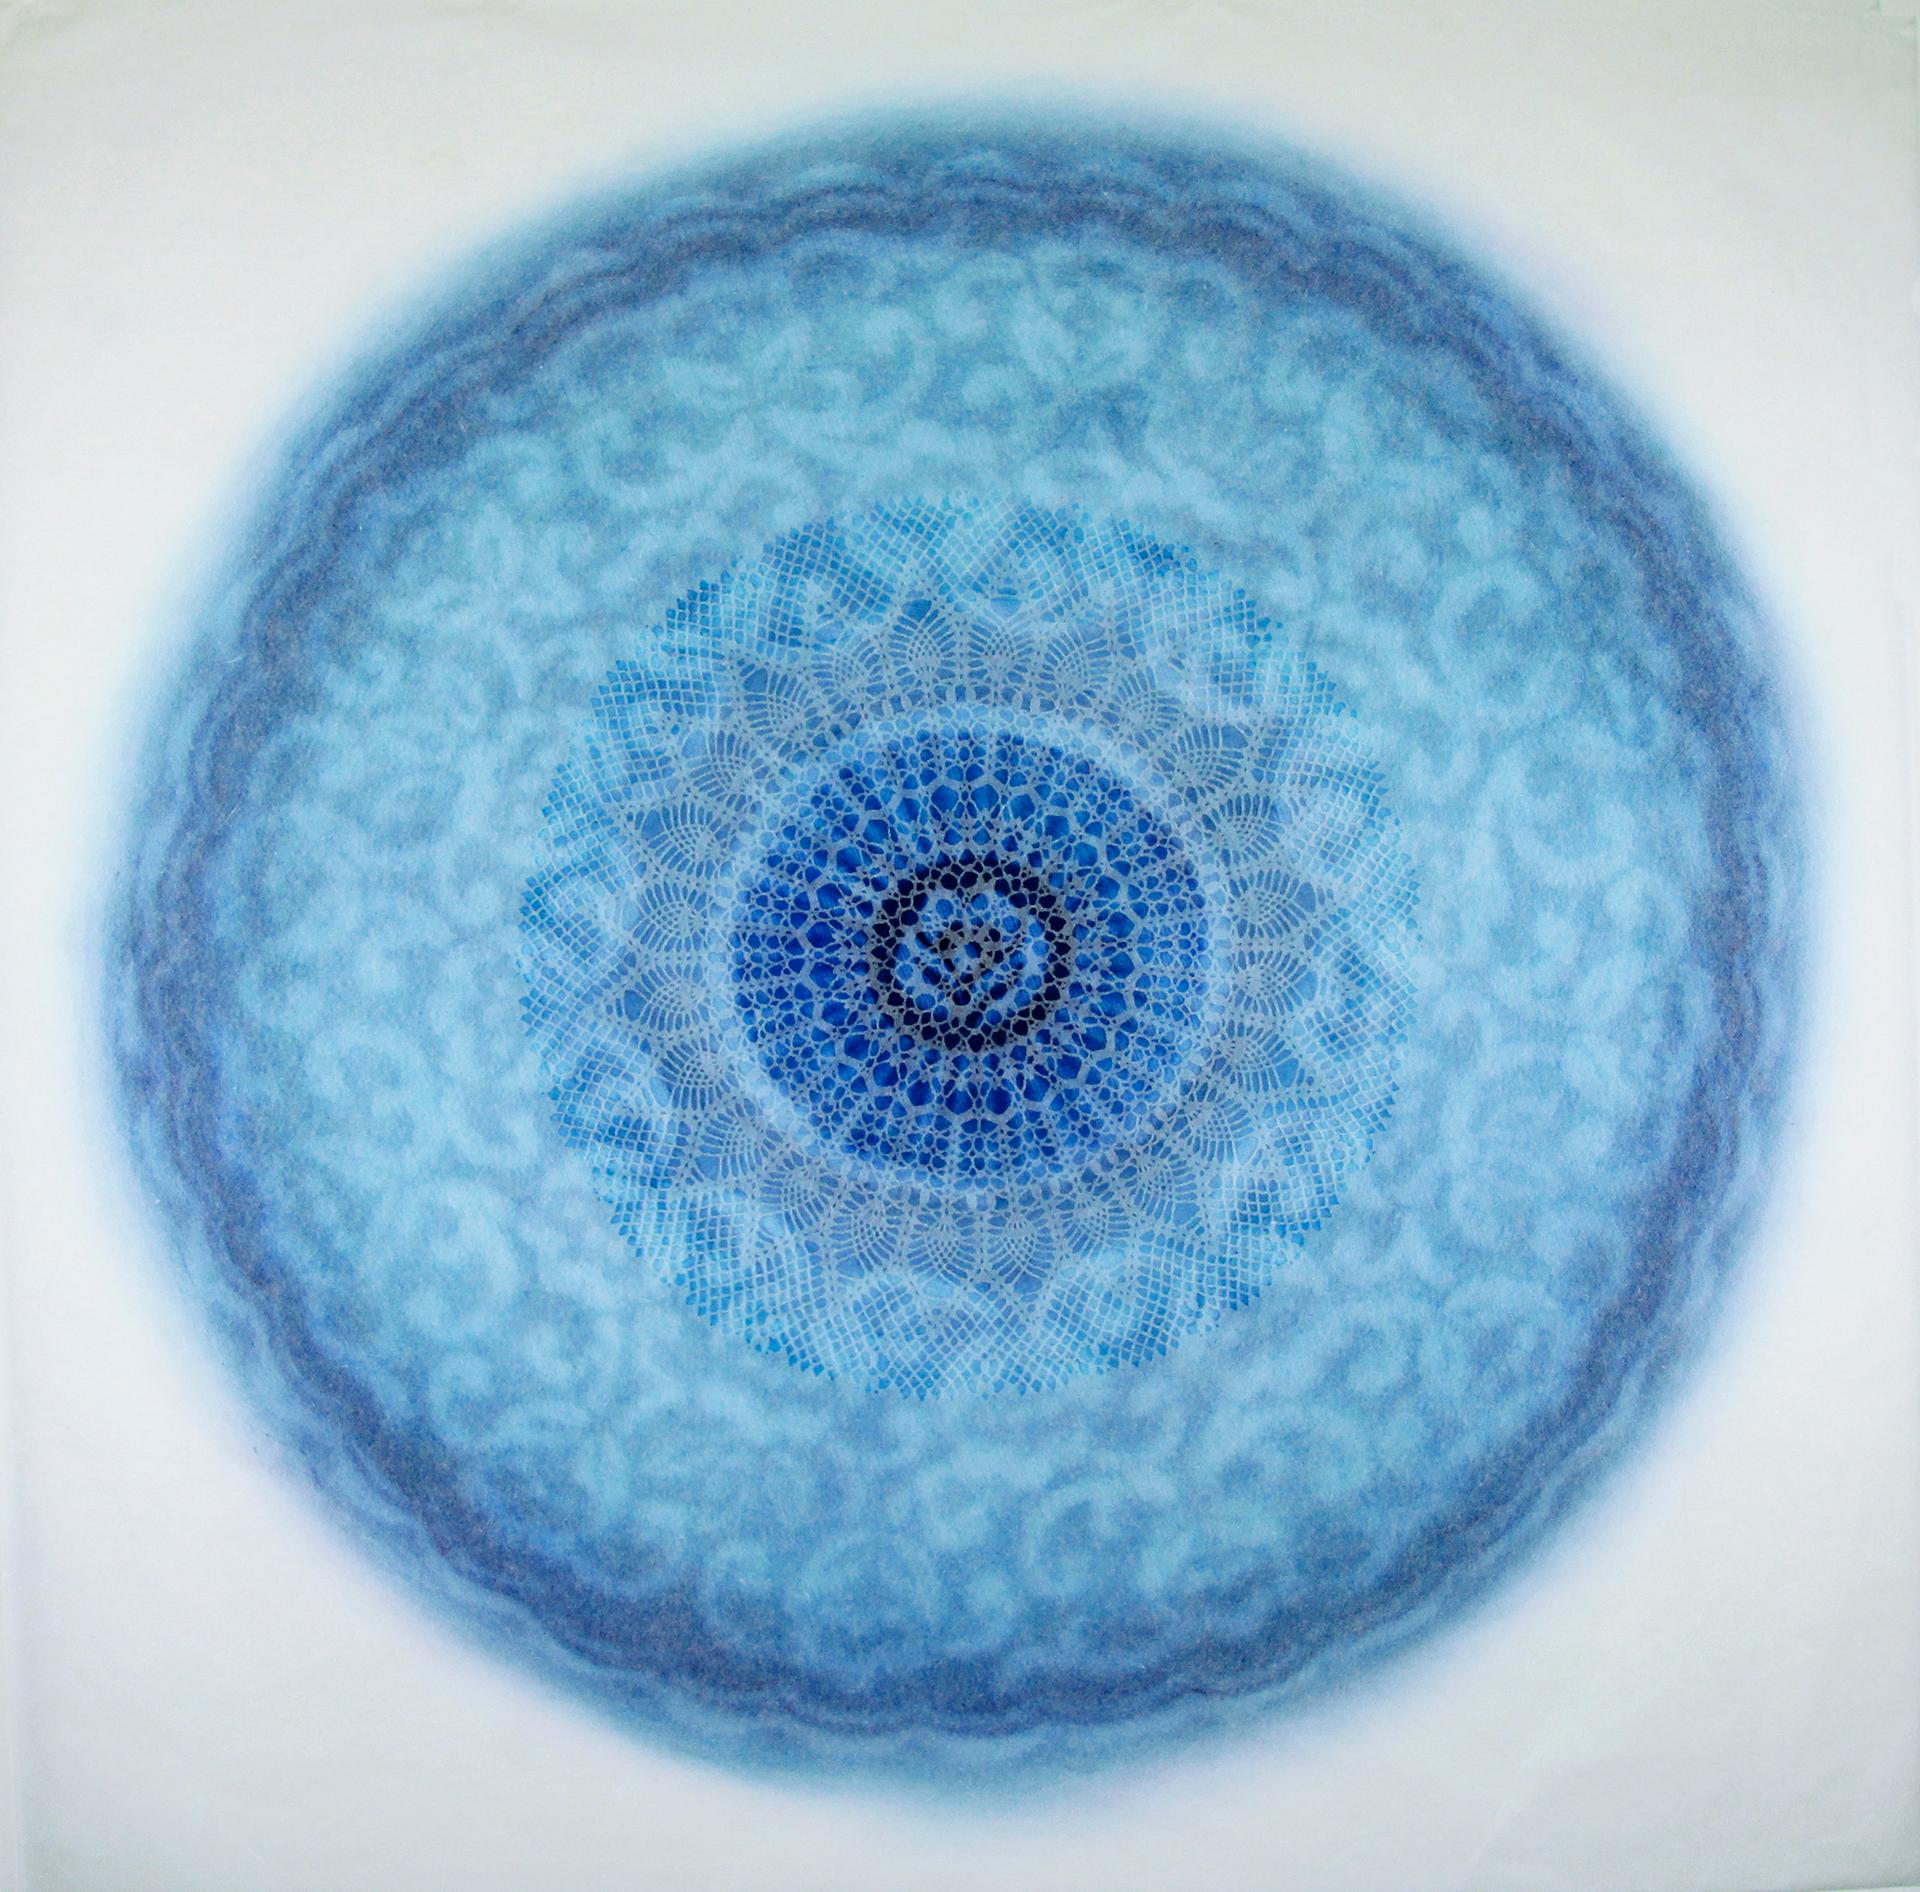 Revolution XXVIII - blue intricate lacey lasercut abstract geometric circle  - Mixed Media Art by Amy Sands